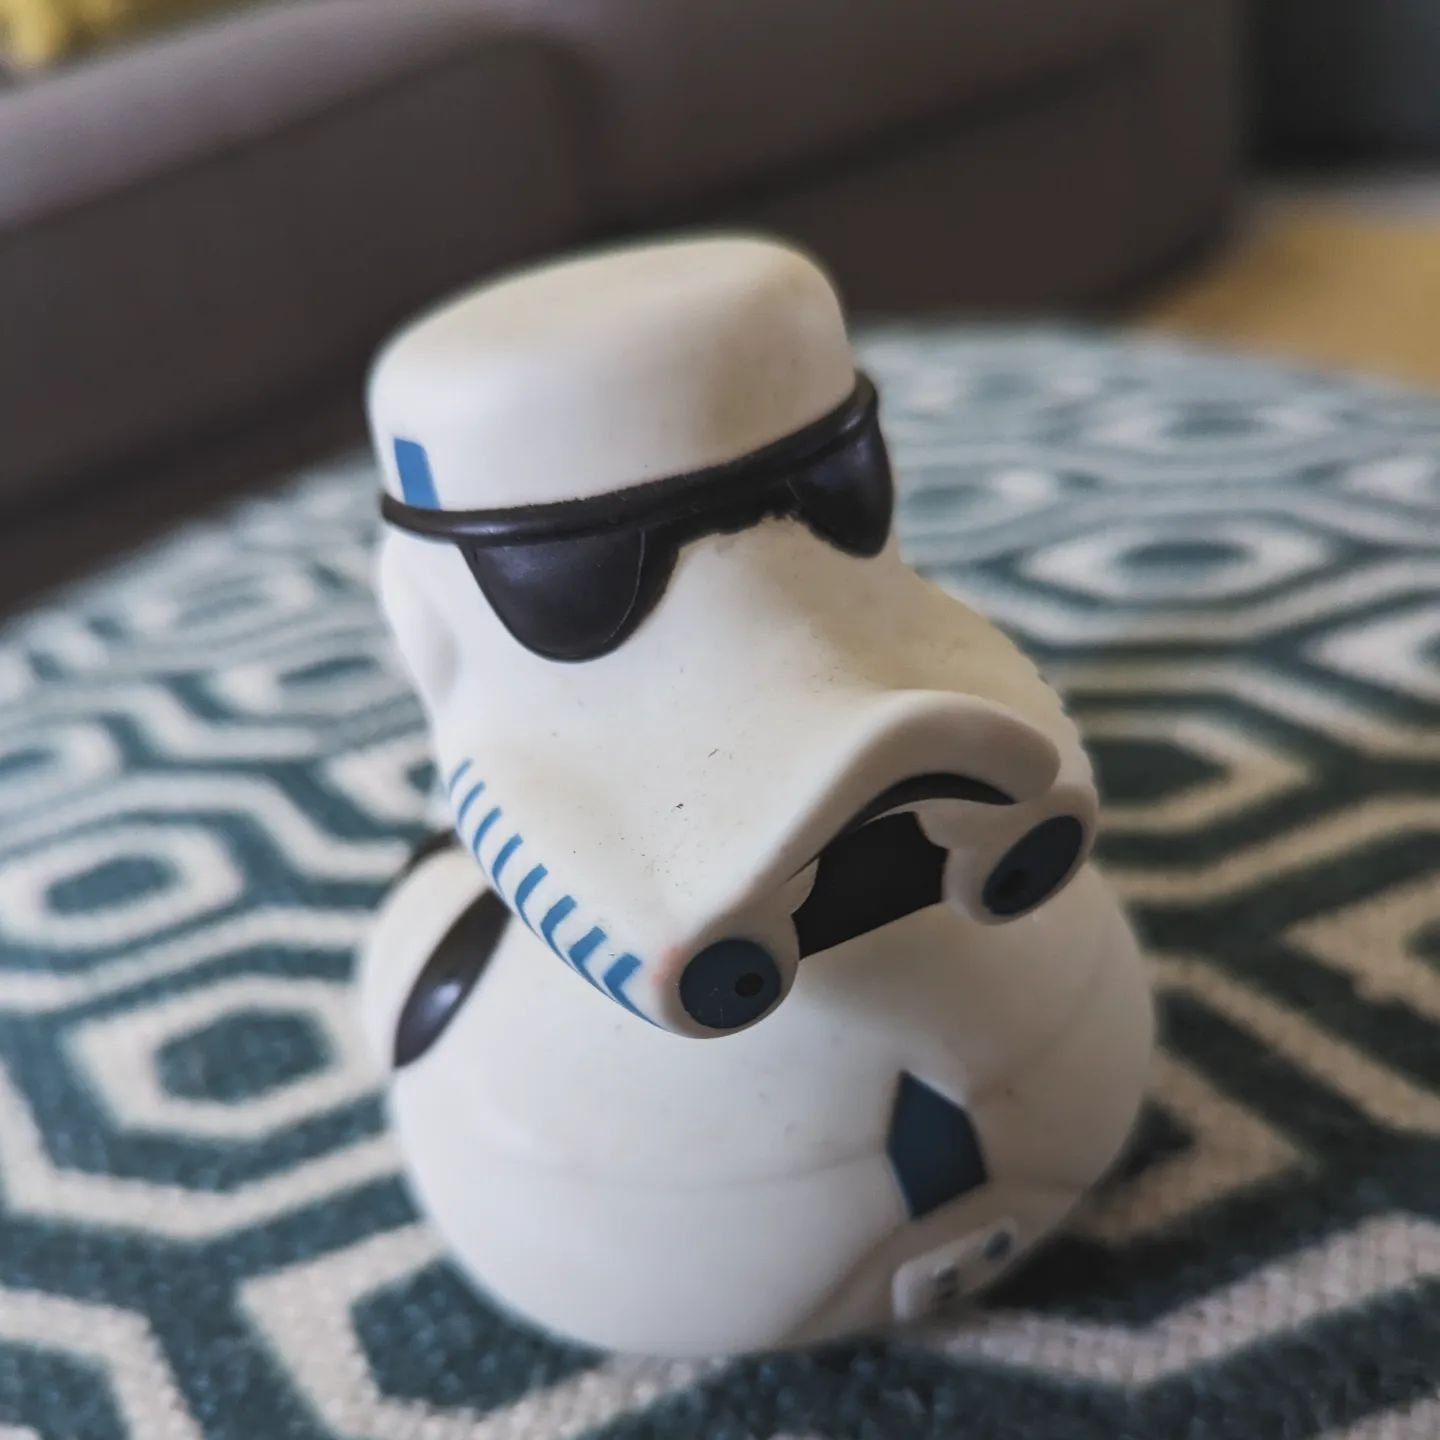 #maythe4thbewithyou Star Wars fans! Love from our resident stormtrooper duck.